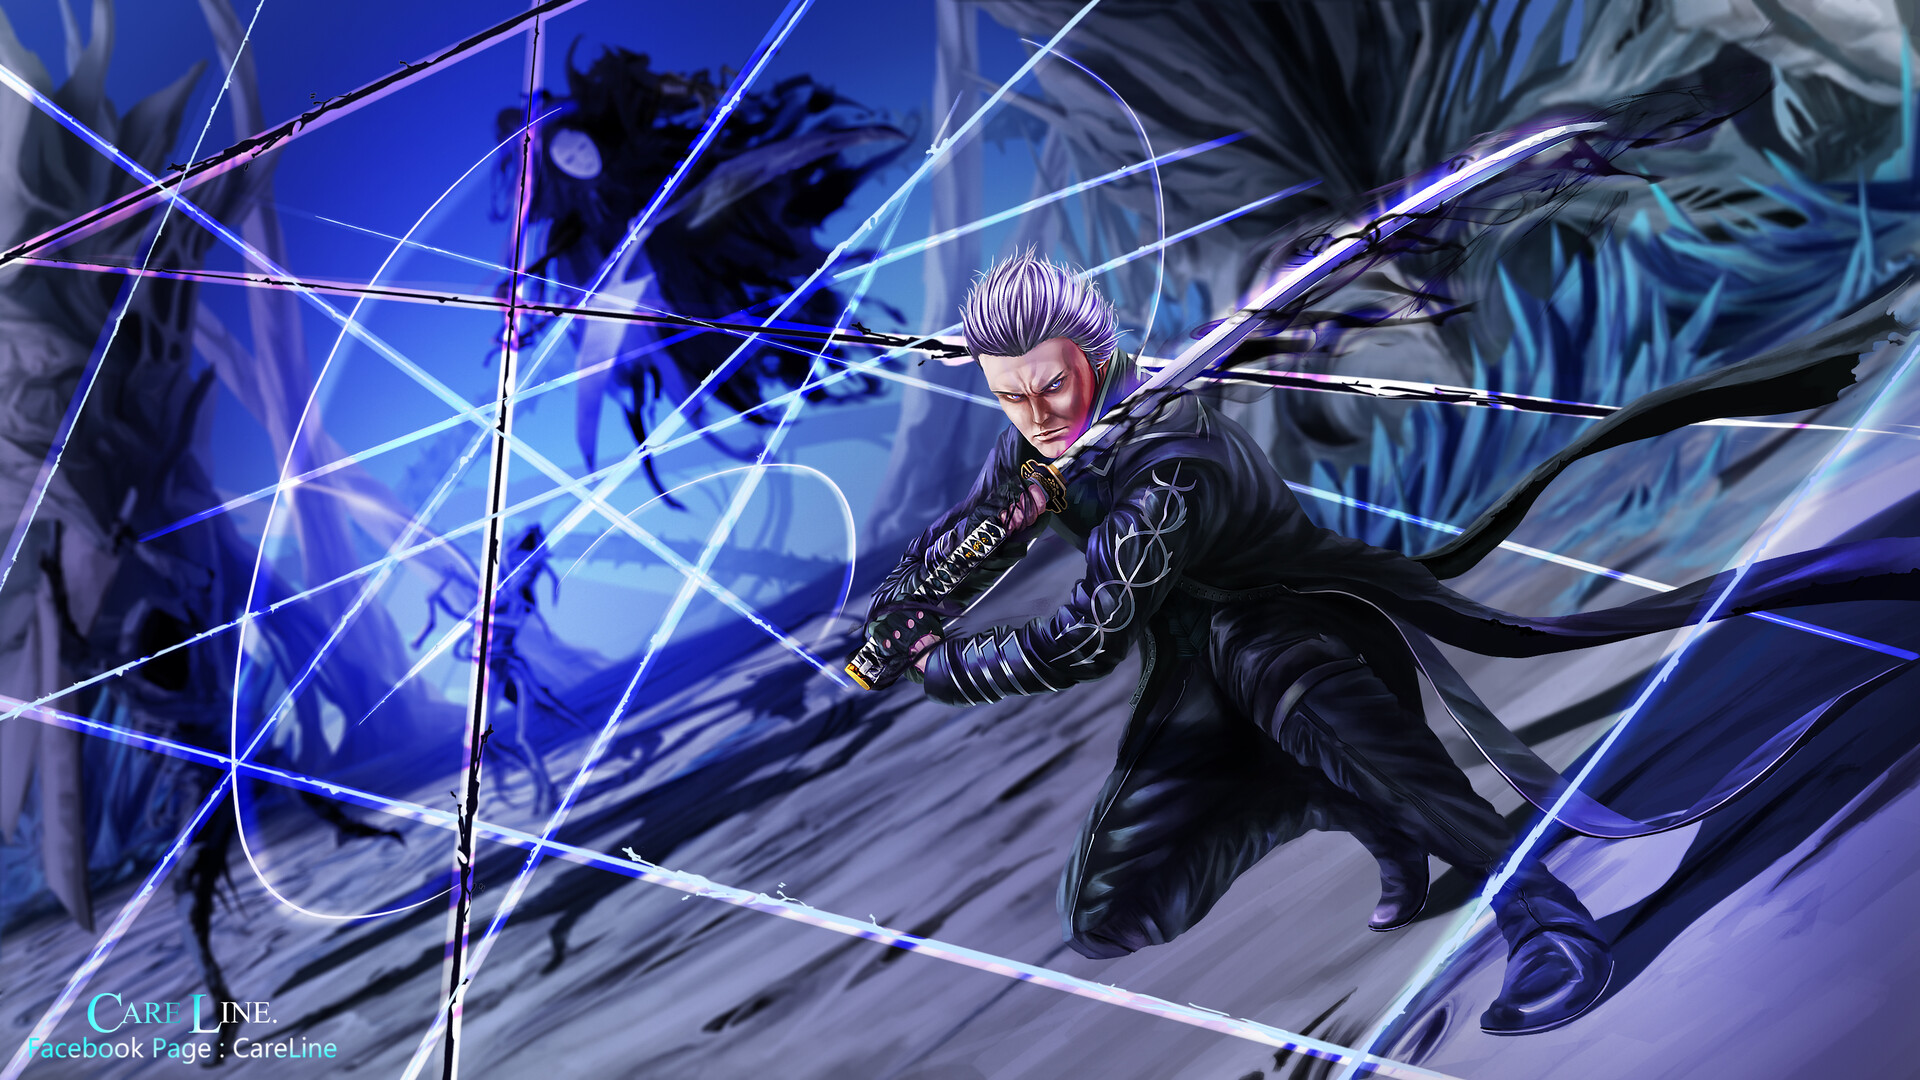 Painting Vergil - Devil May Cry 5 Fanart 